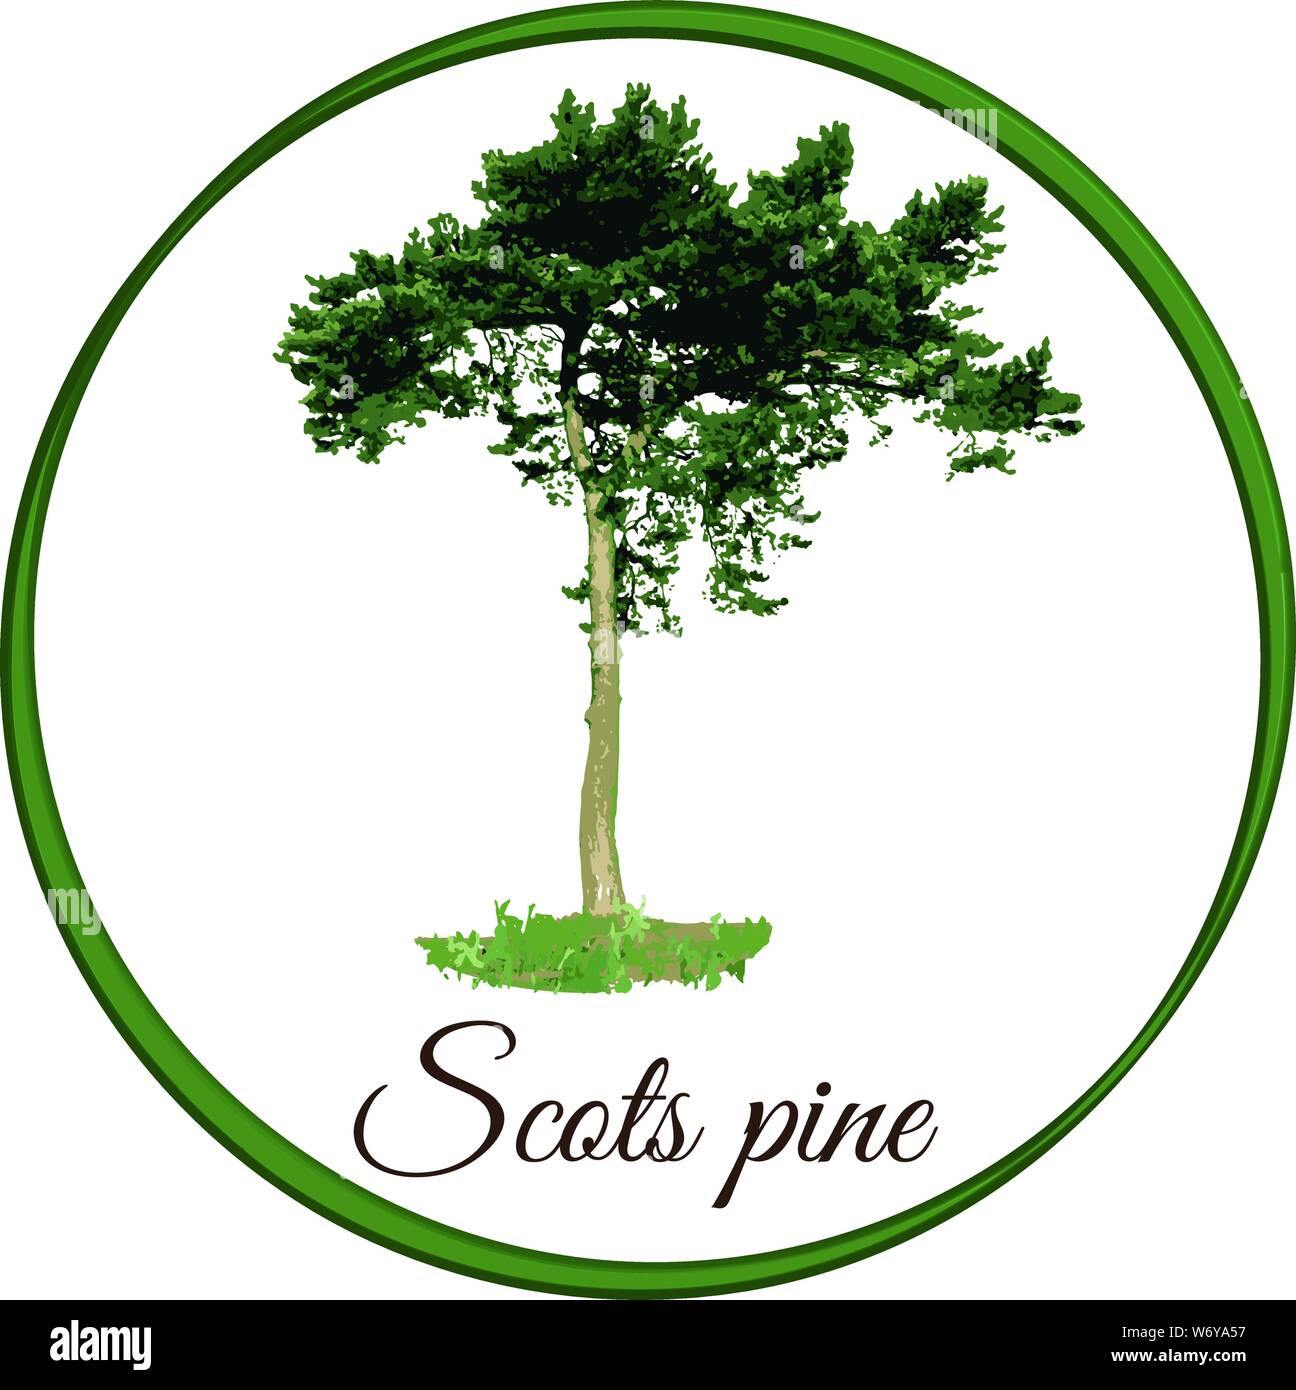 Scots pine tree as vector drawn conifer evergreen Stock Vector